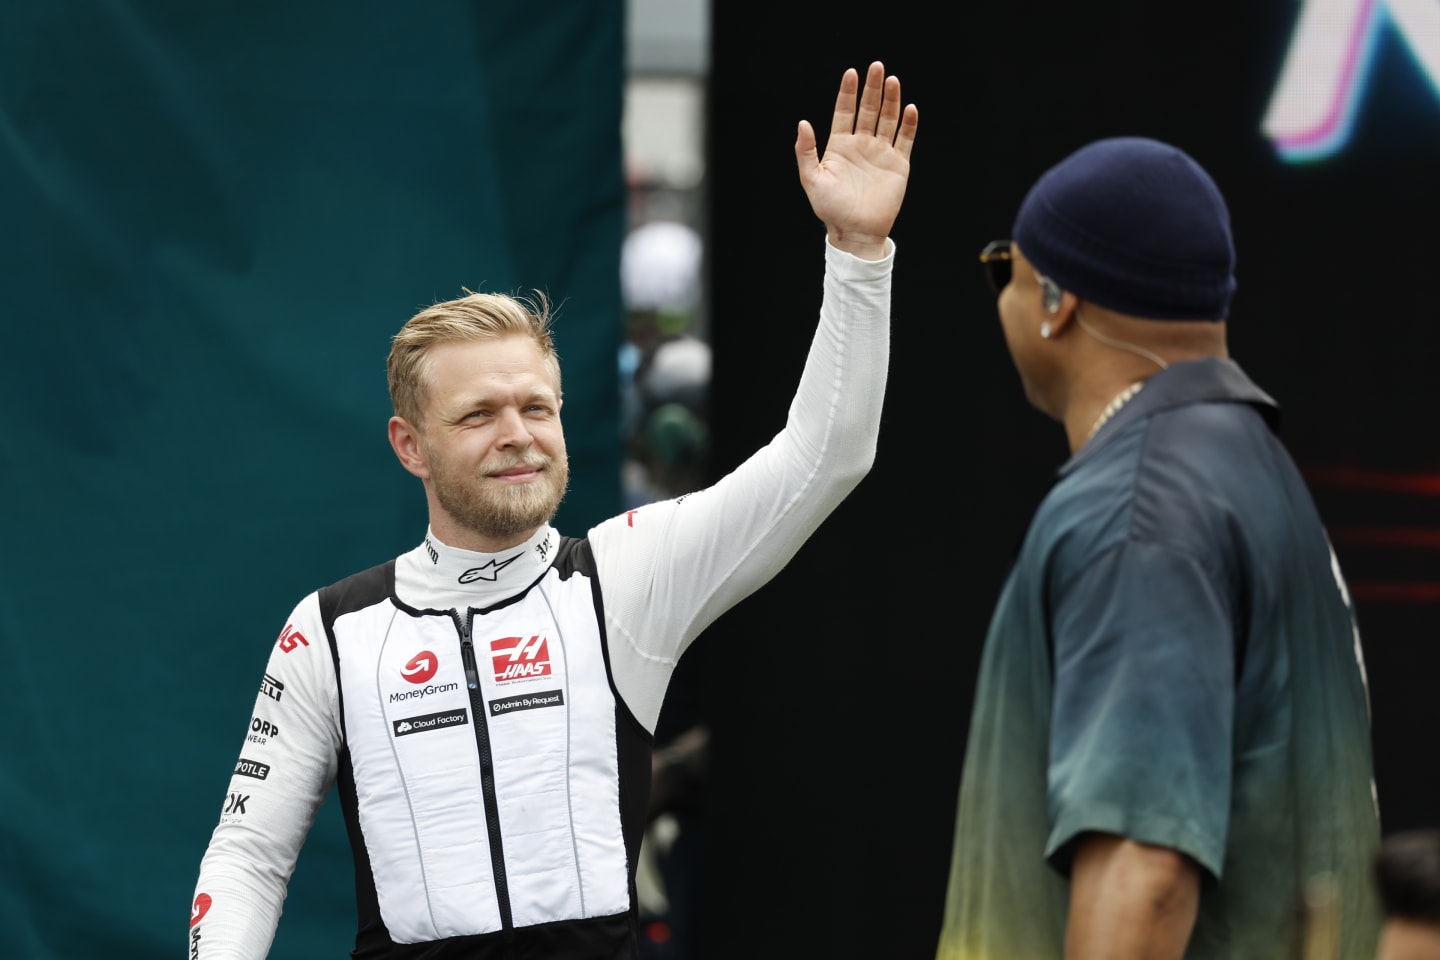 MIAMI, FLORIDA - MAY 07: Kevin Magnussen of Denmark and Haas F1 walks on the grid prior to the F1